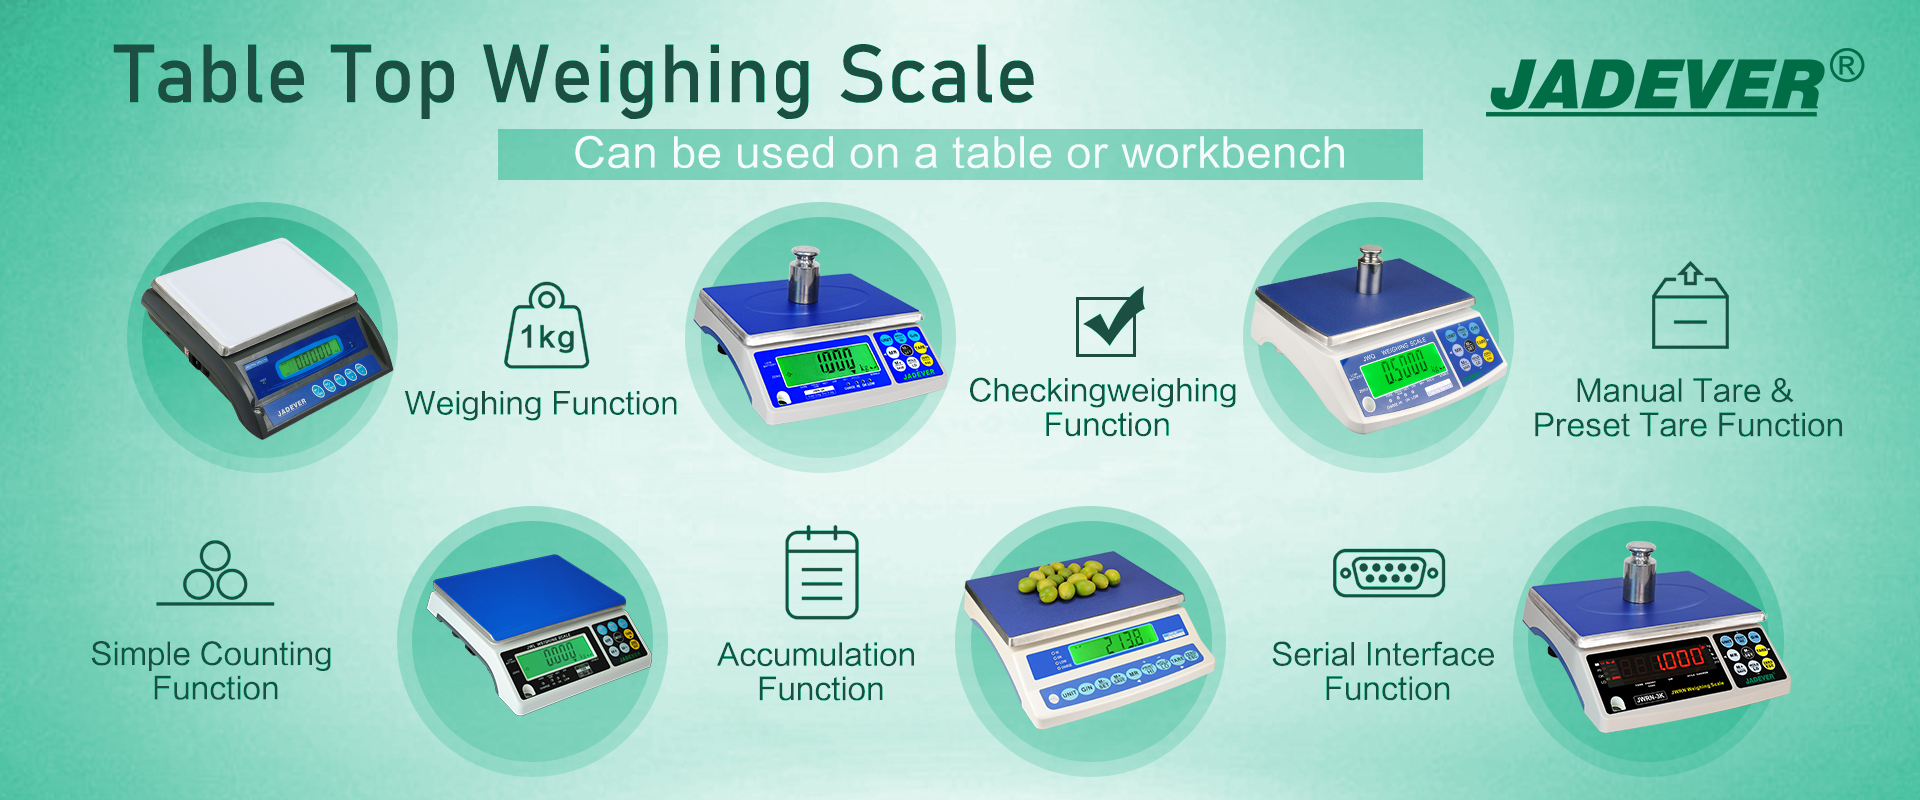 Table Top Weighing Scale with Checkweighing Function